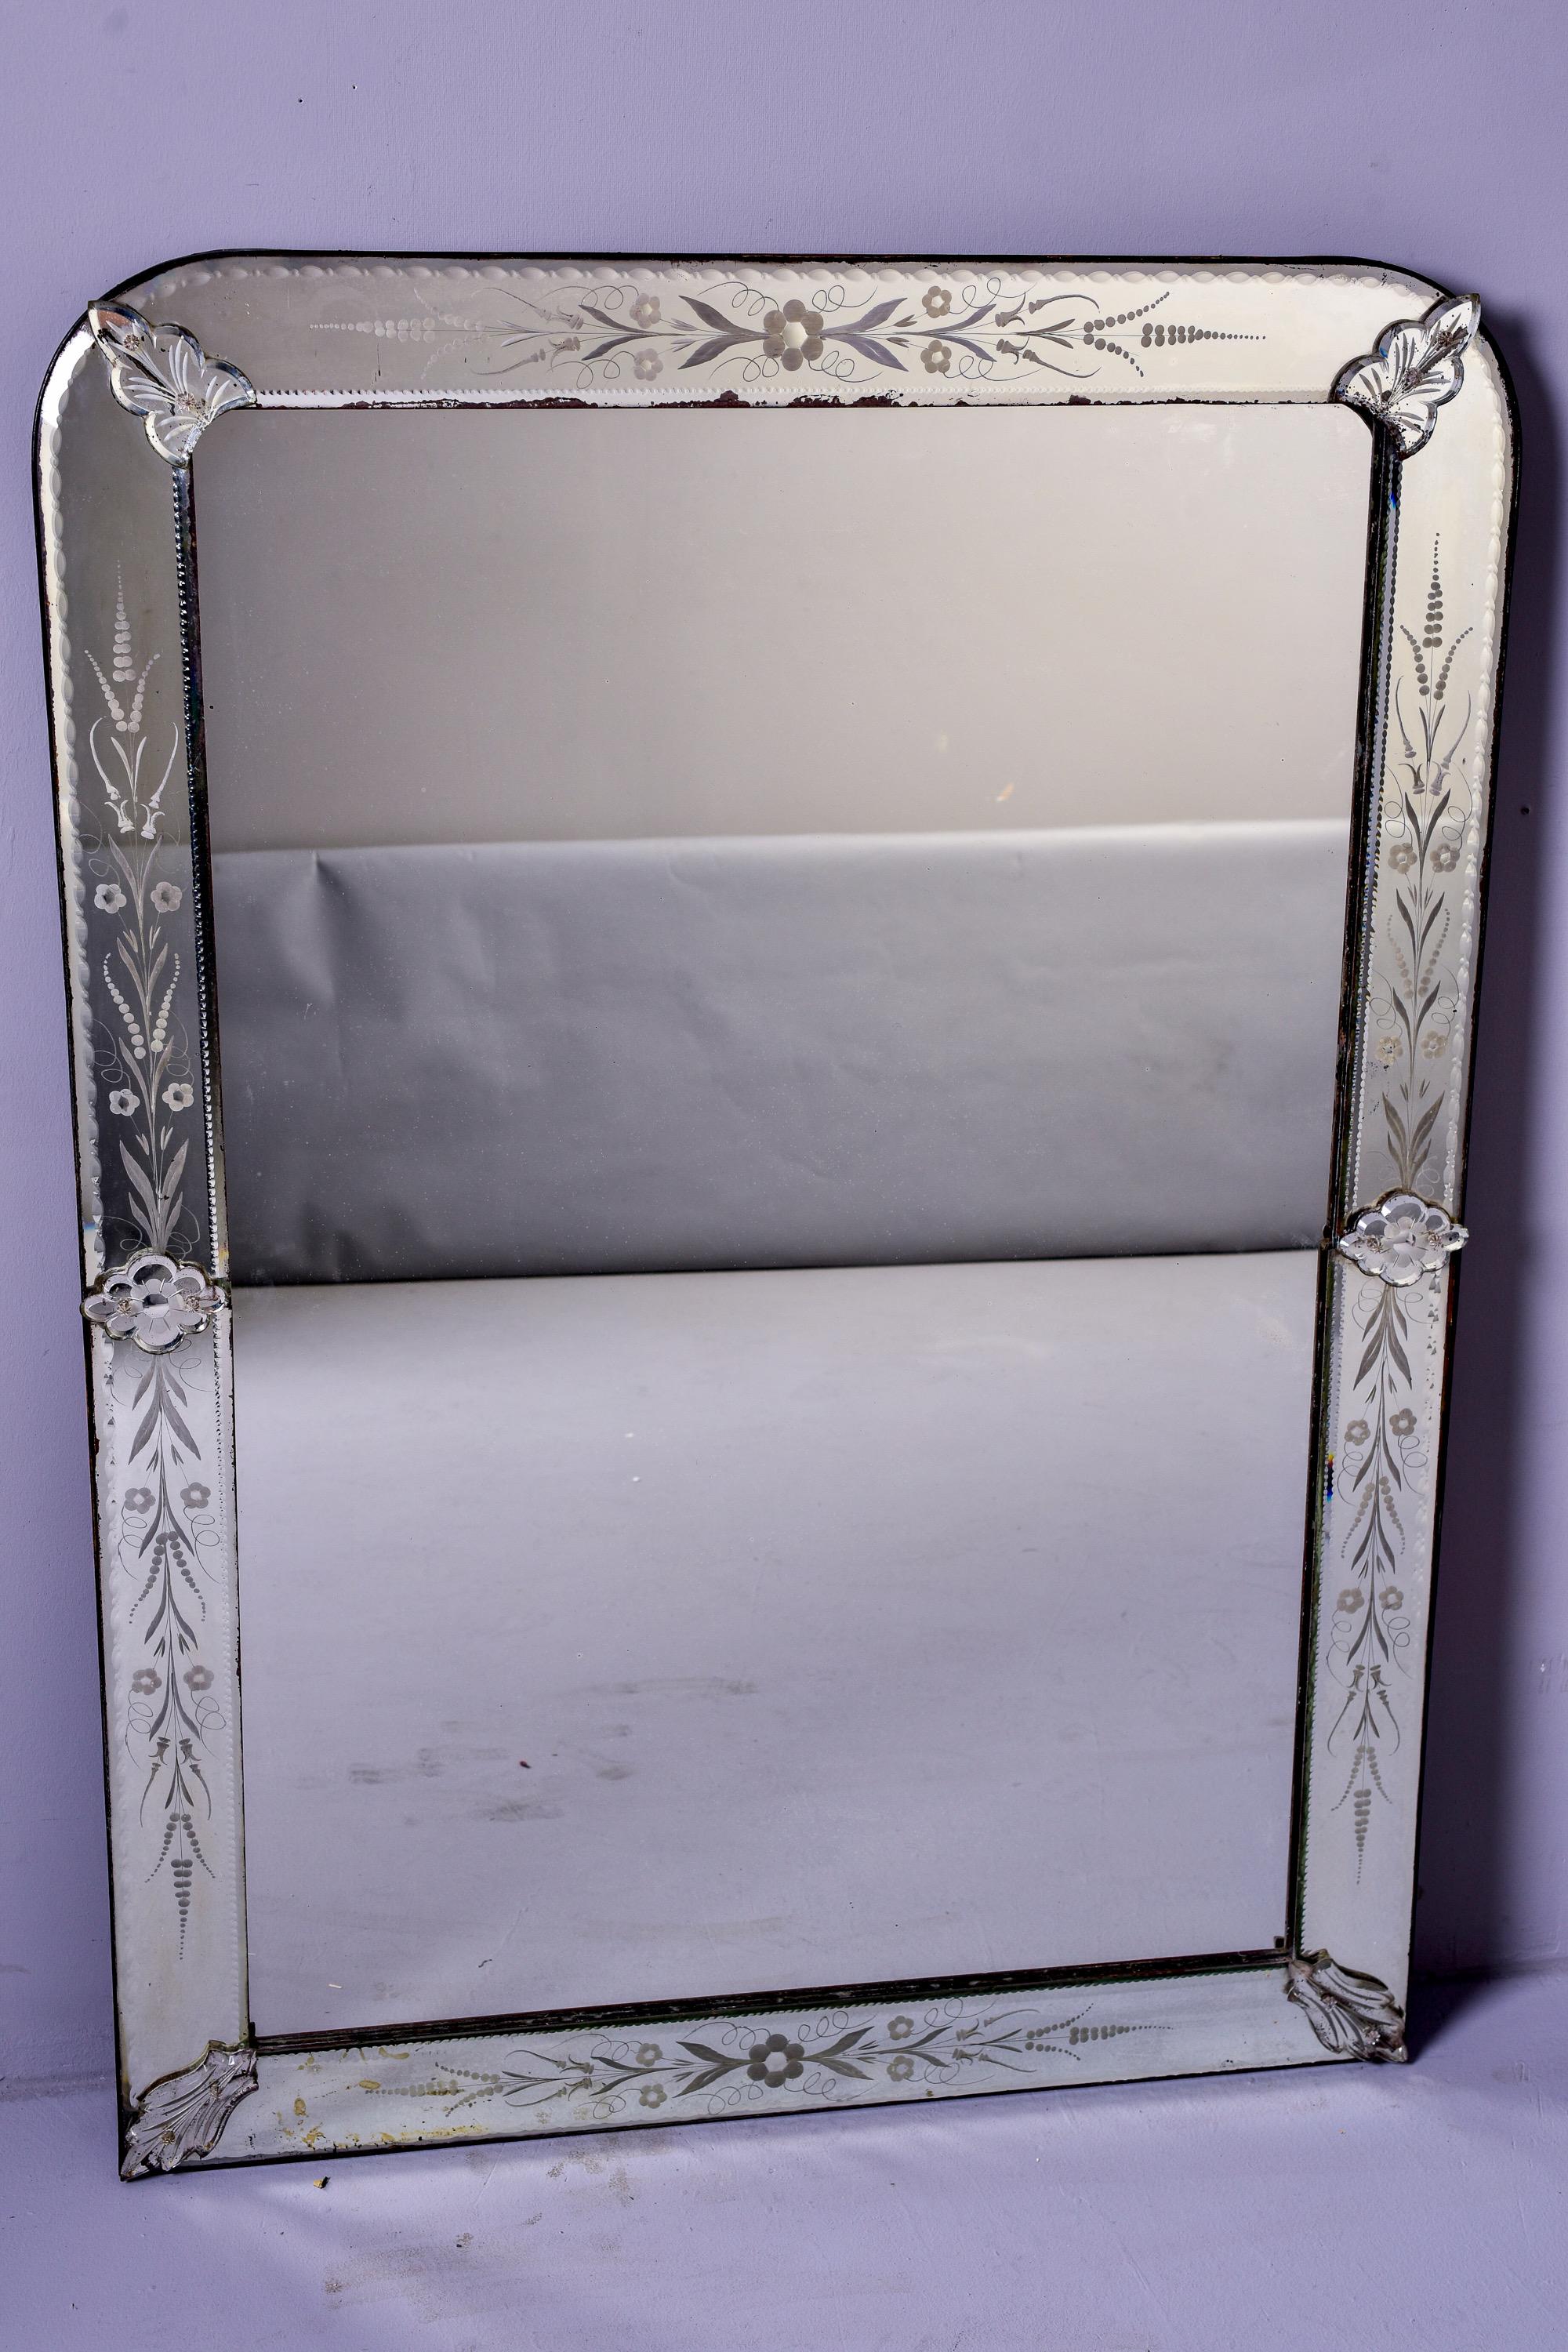 Circa 1930s / 1940s Venetian mirror features a mirrored frame with etched floral and vine details with a curved top and decorative borders on inside and outer edge. Unknown maker. 

Unframed mirror size: 44.25” high x 29.75” wide

Some